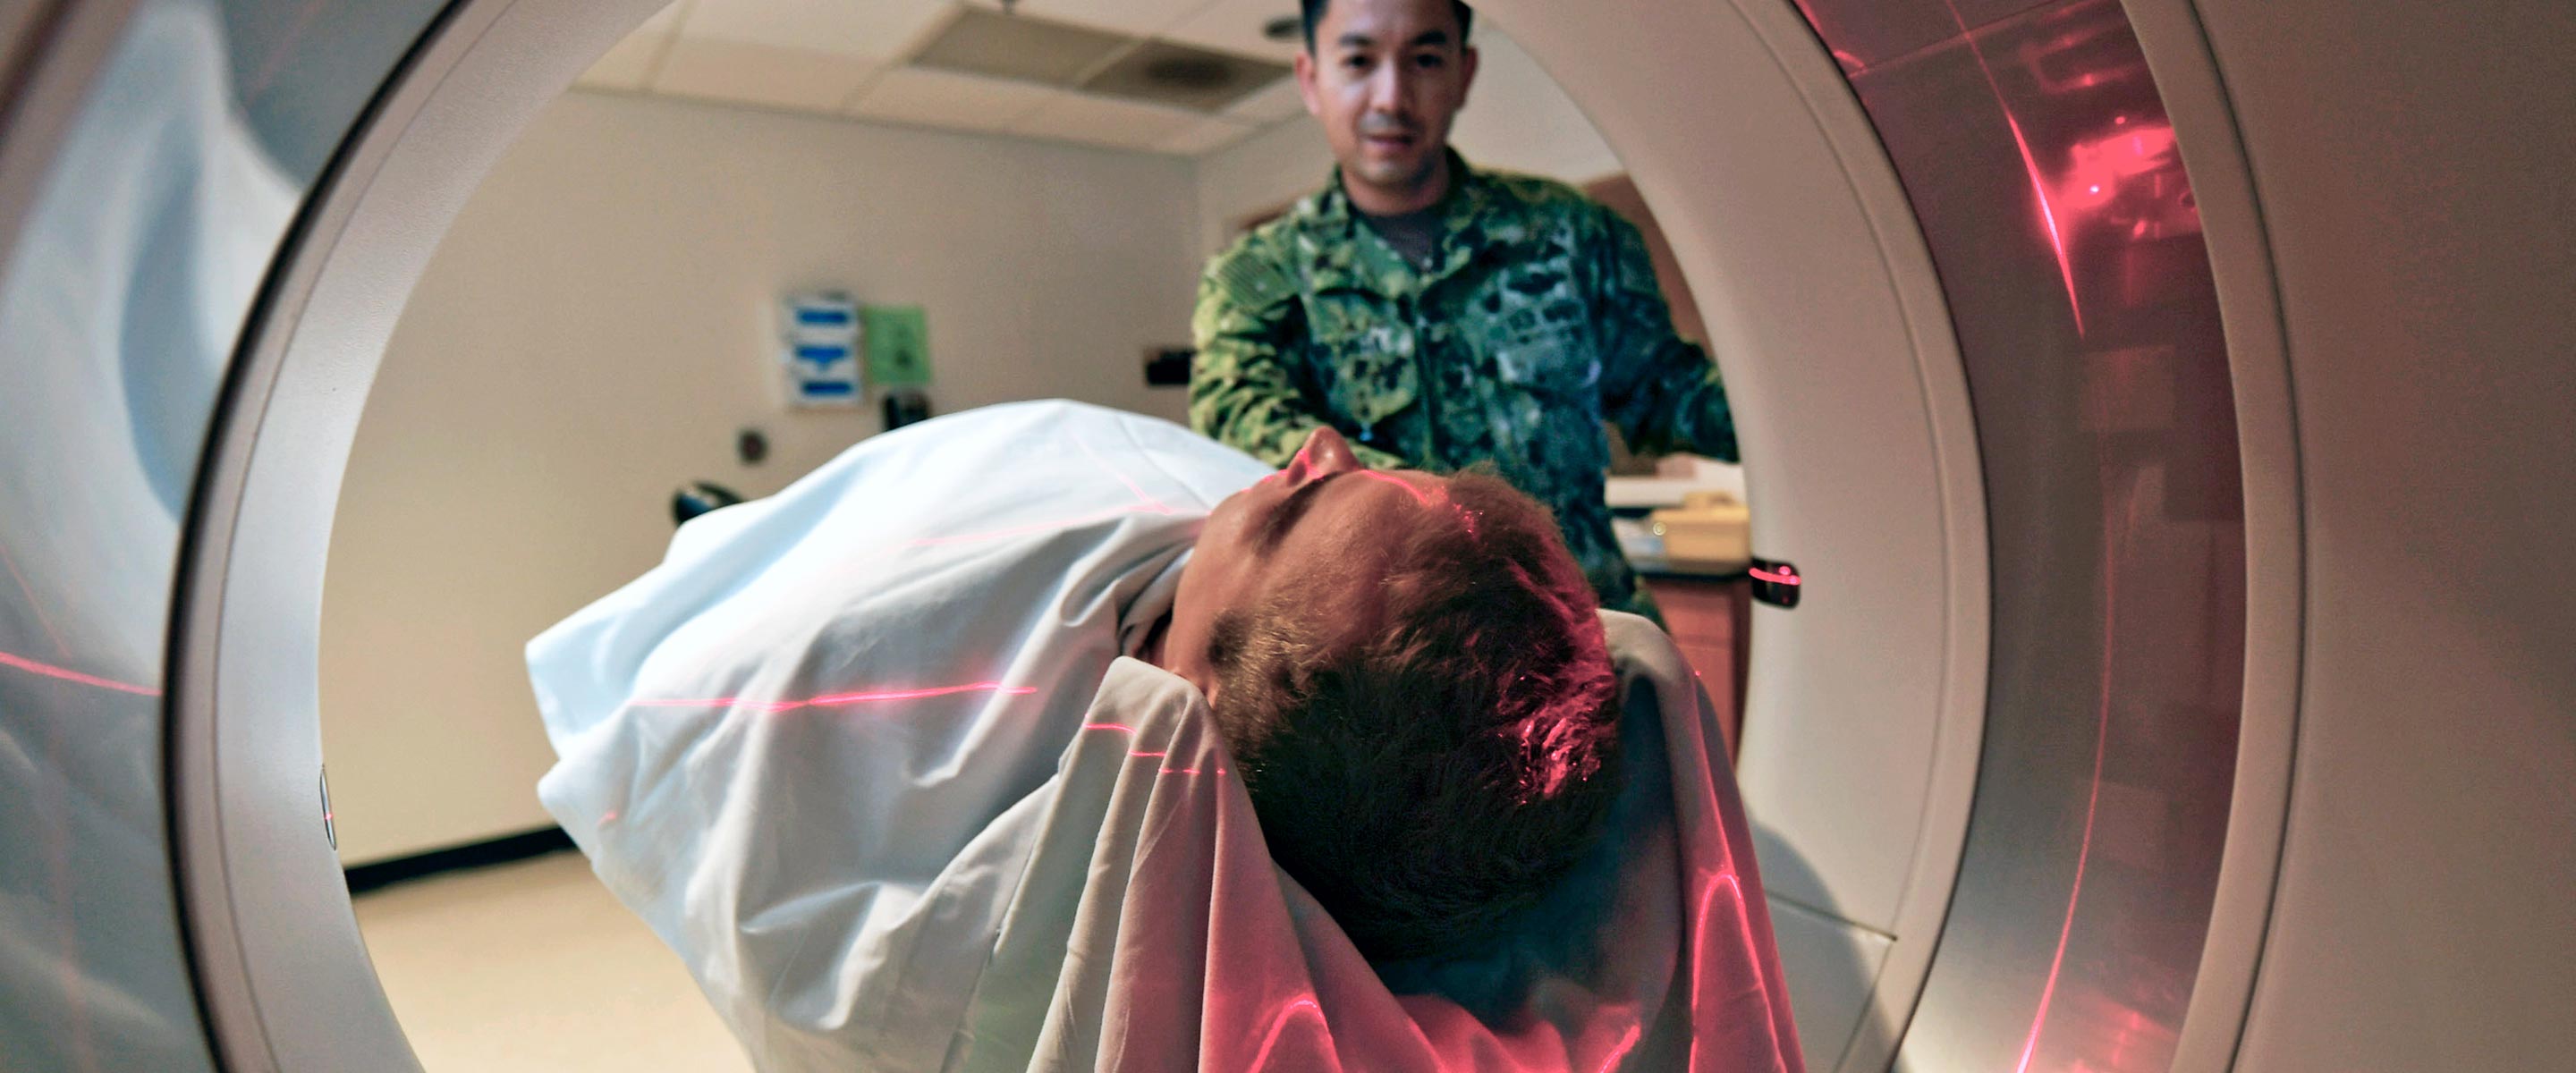 Navy Radiation Health Specialist operates a medical machine